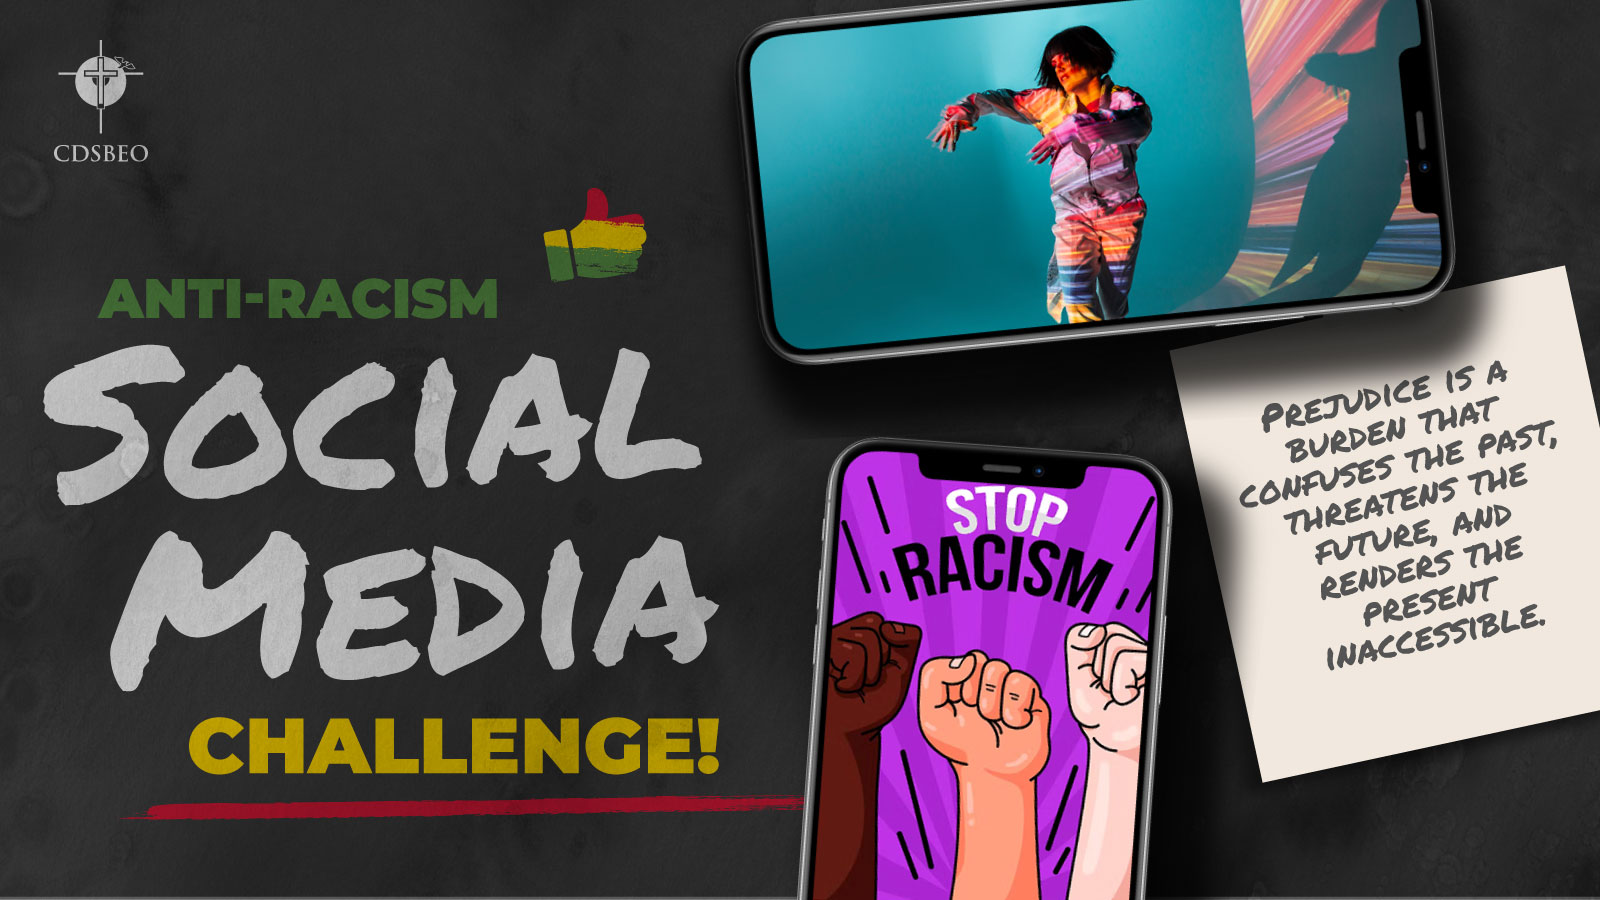 Graphics for the anti-racism social media challenge including phones showing dancers and anti-racism posters.